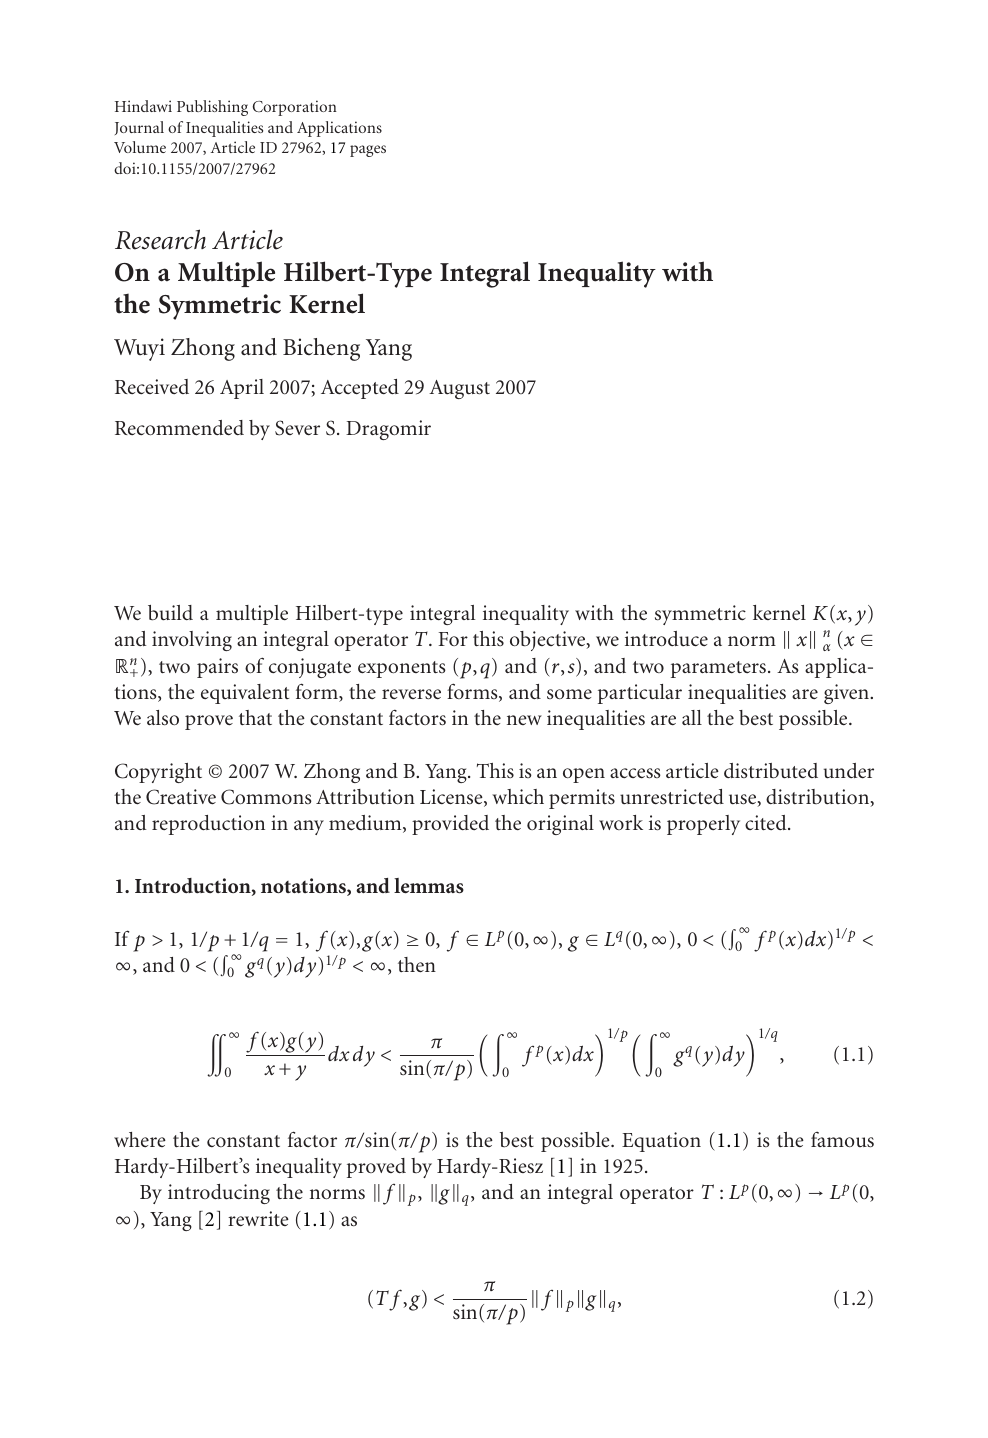 On A Multiple Hilbert Type Integral Inequality With The Symmetric Kernel Topic Of Research Paper In Mathematics Download Scholarly Article Pdf And Read For Free On Cyberleninka Open Science Hub